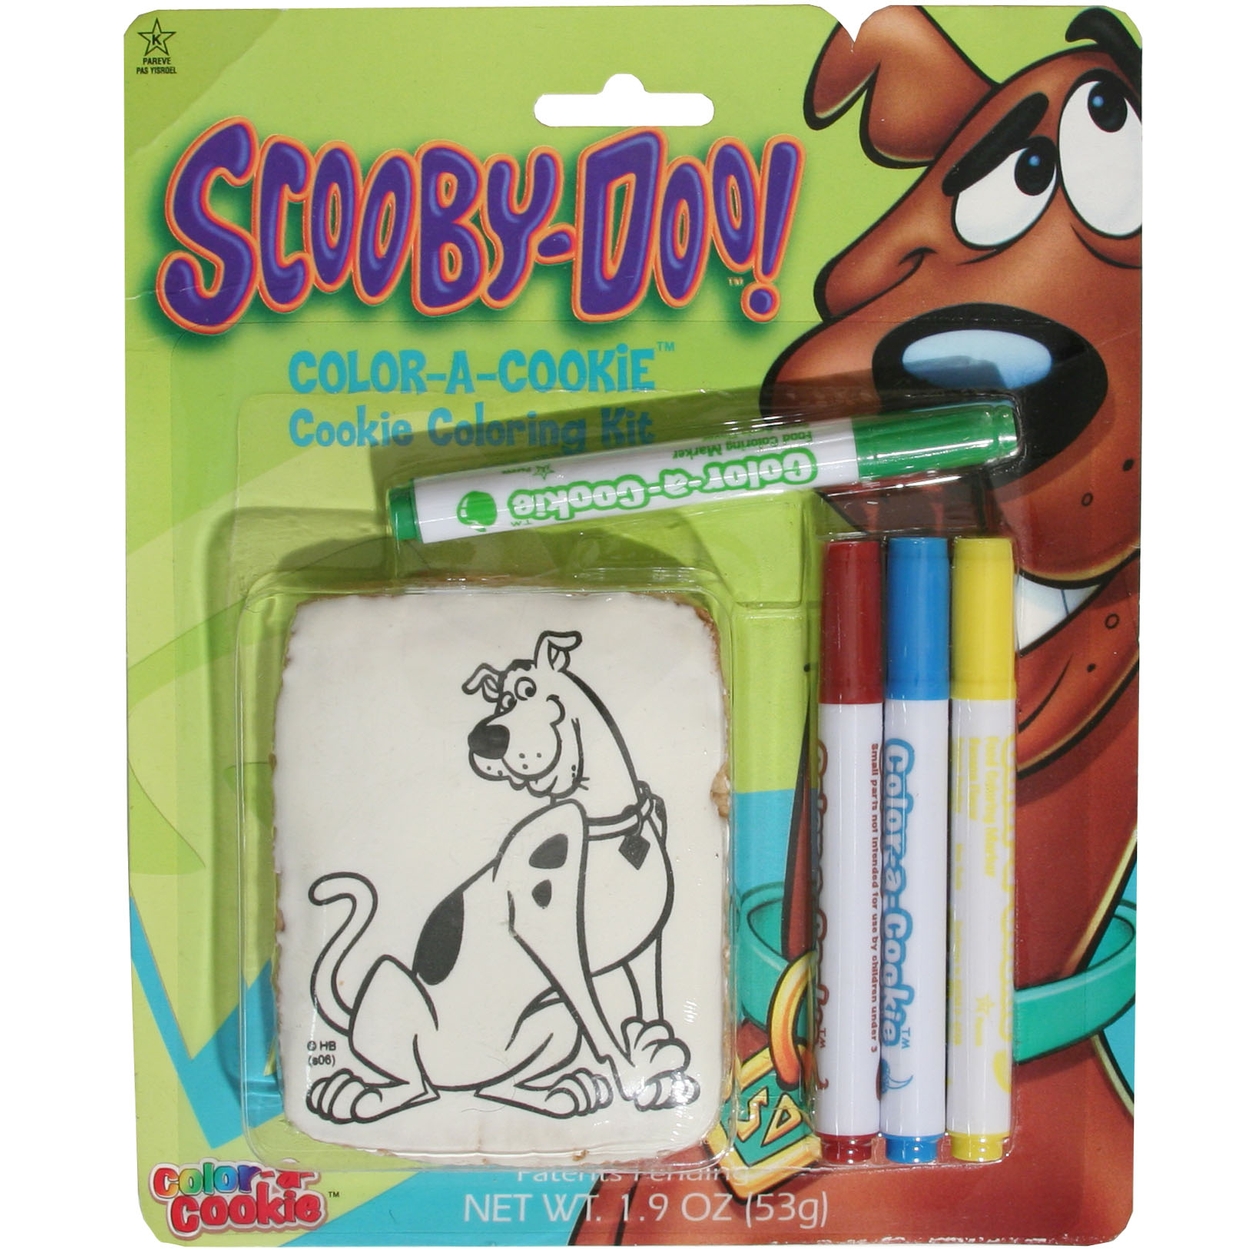 Scooby Doo Color-A-Cookie • Color-A-Cookie • Bulk Candy • Oh! Nuts®